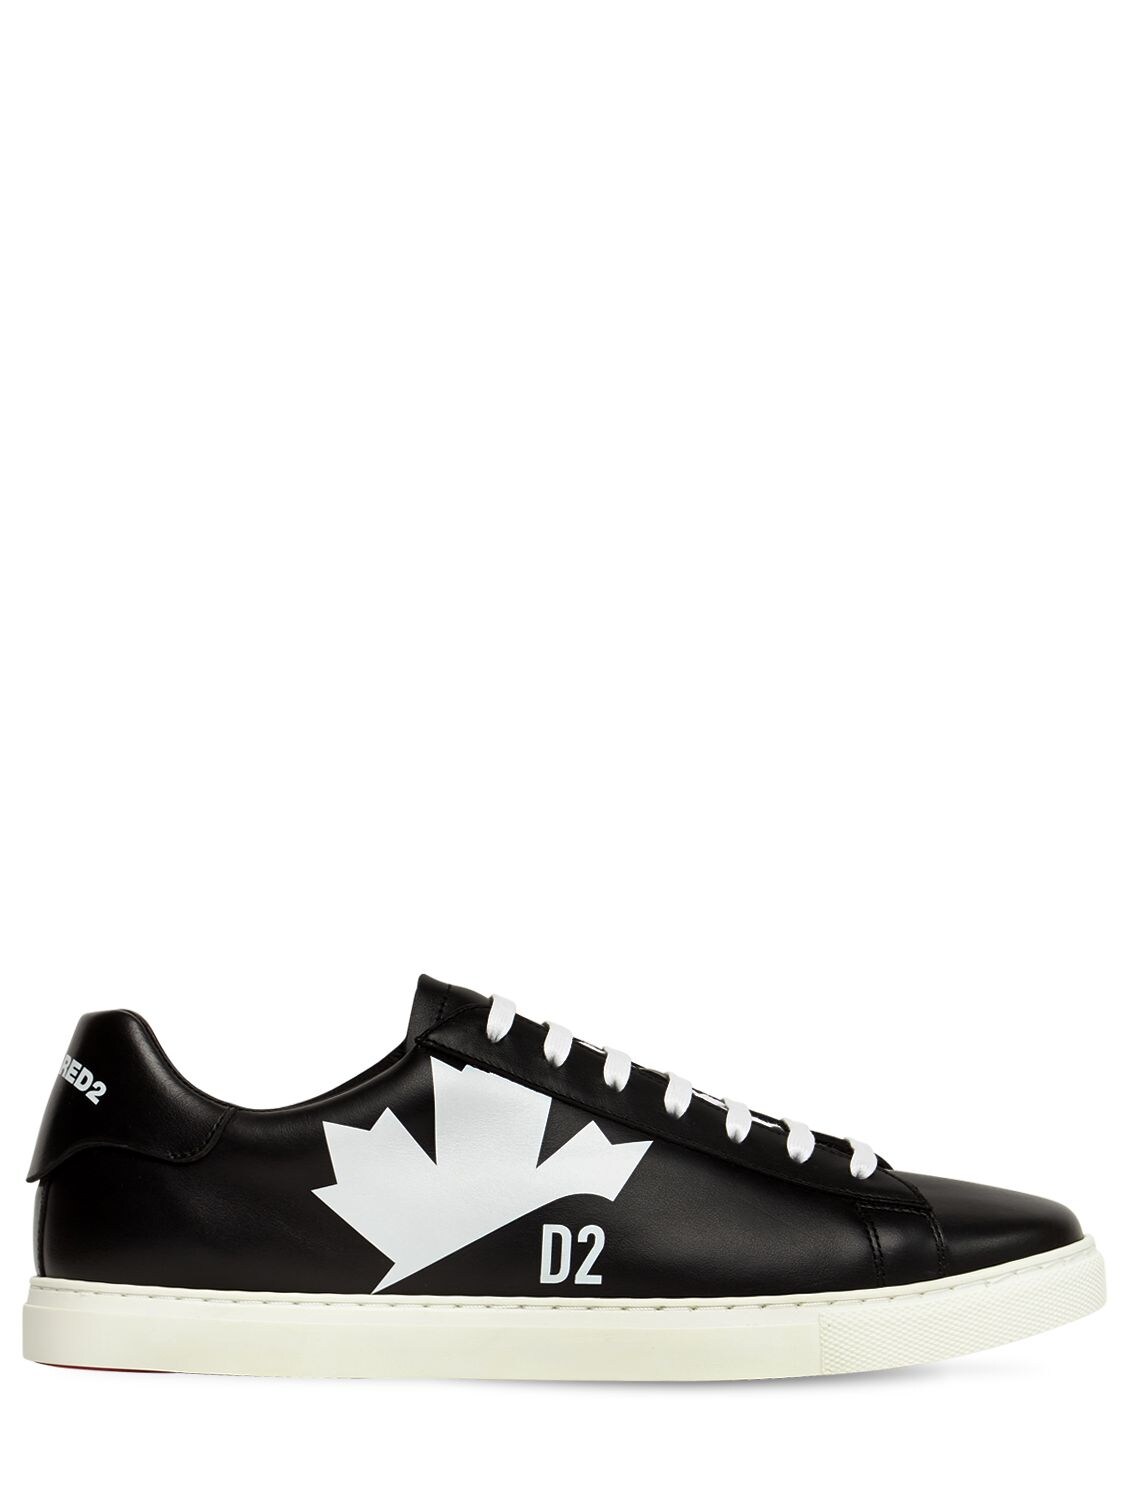 Dsquared2 New Tennis Maple Print Leather Sneakers In Black,white